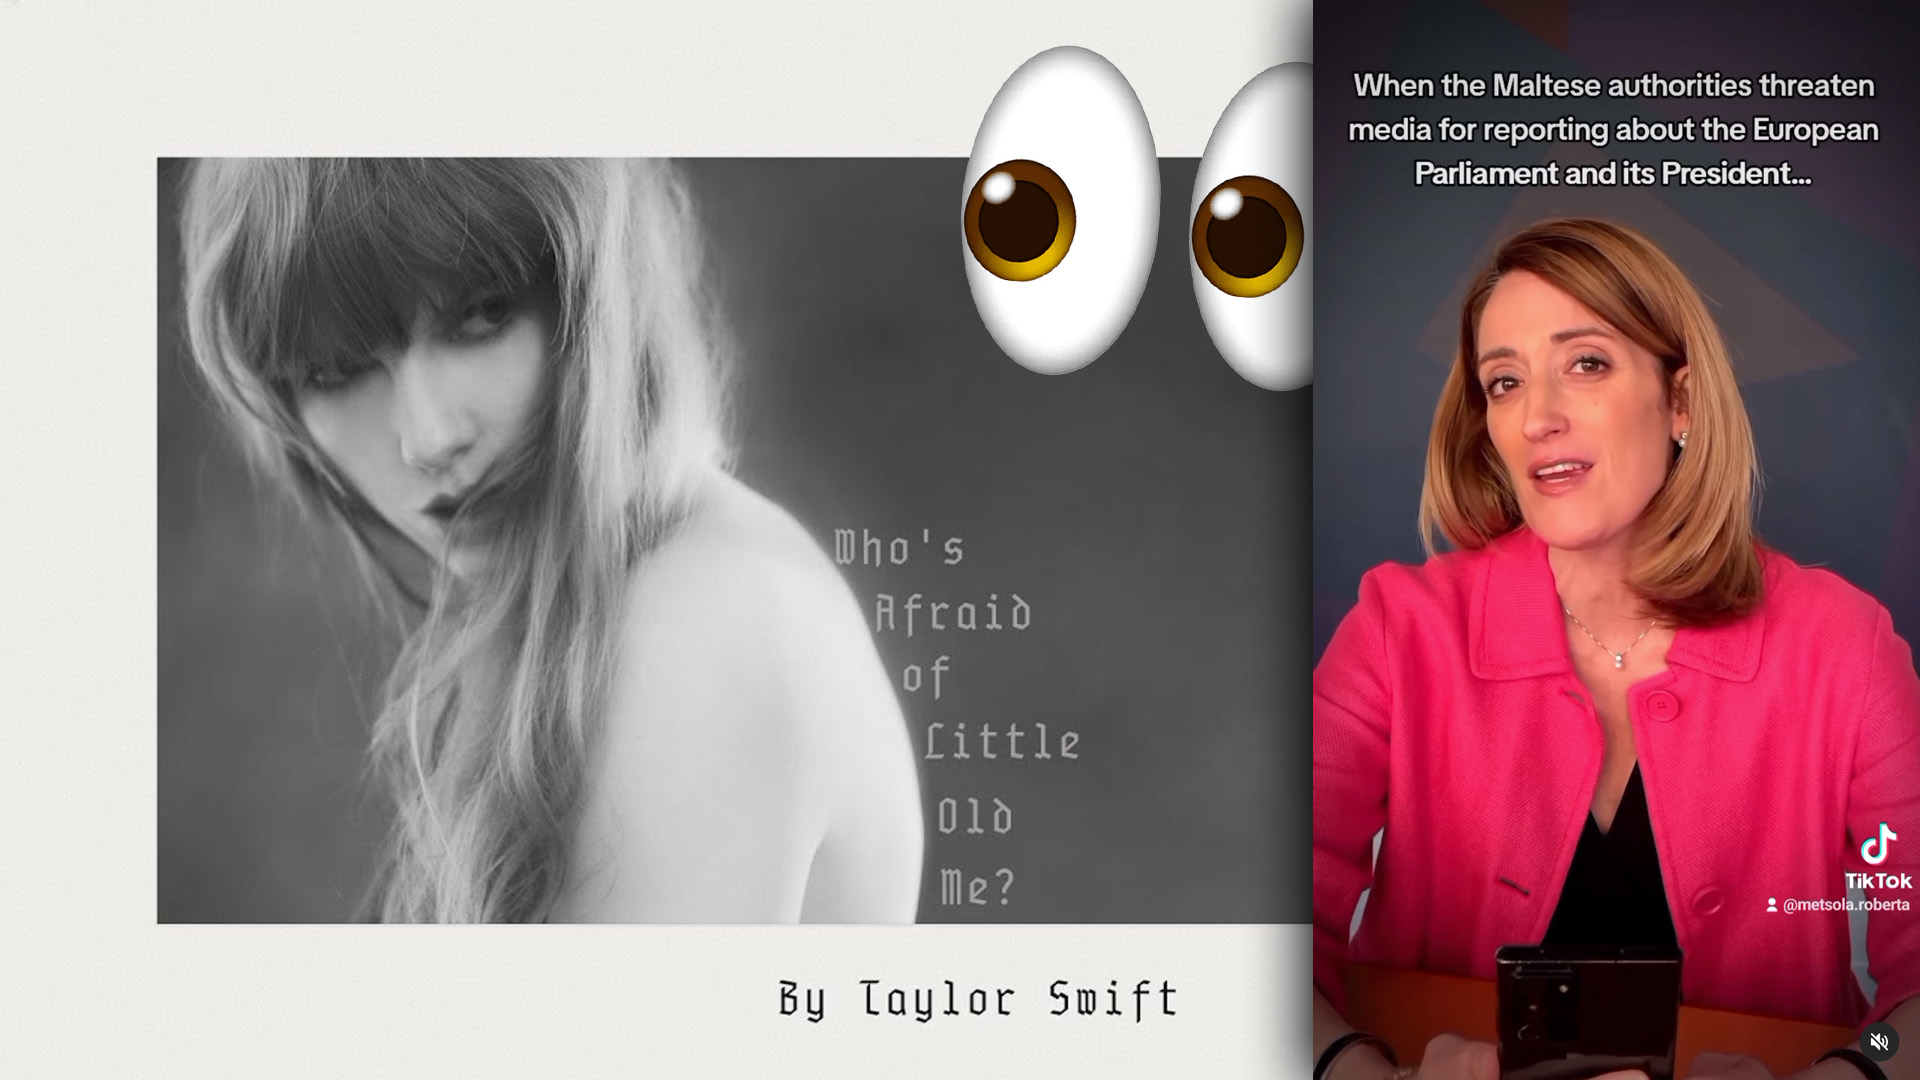 Roberta Metsola Channels Taylor Swift In Jab at Government